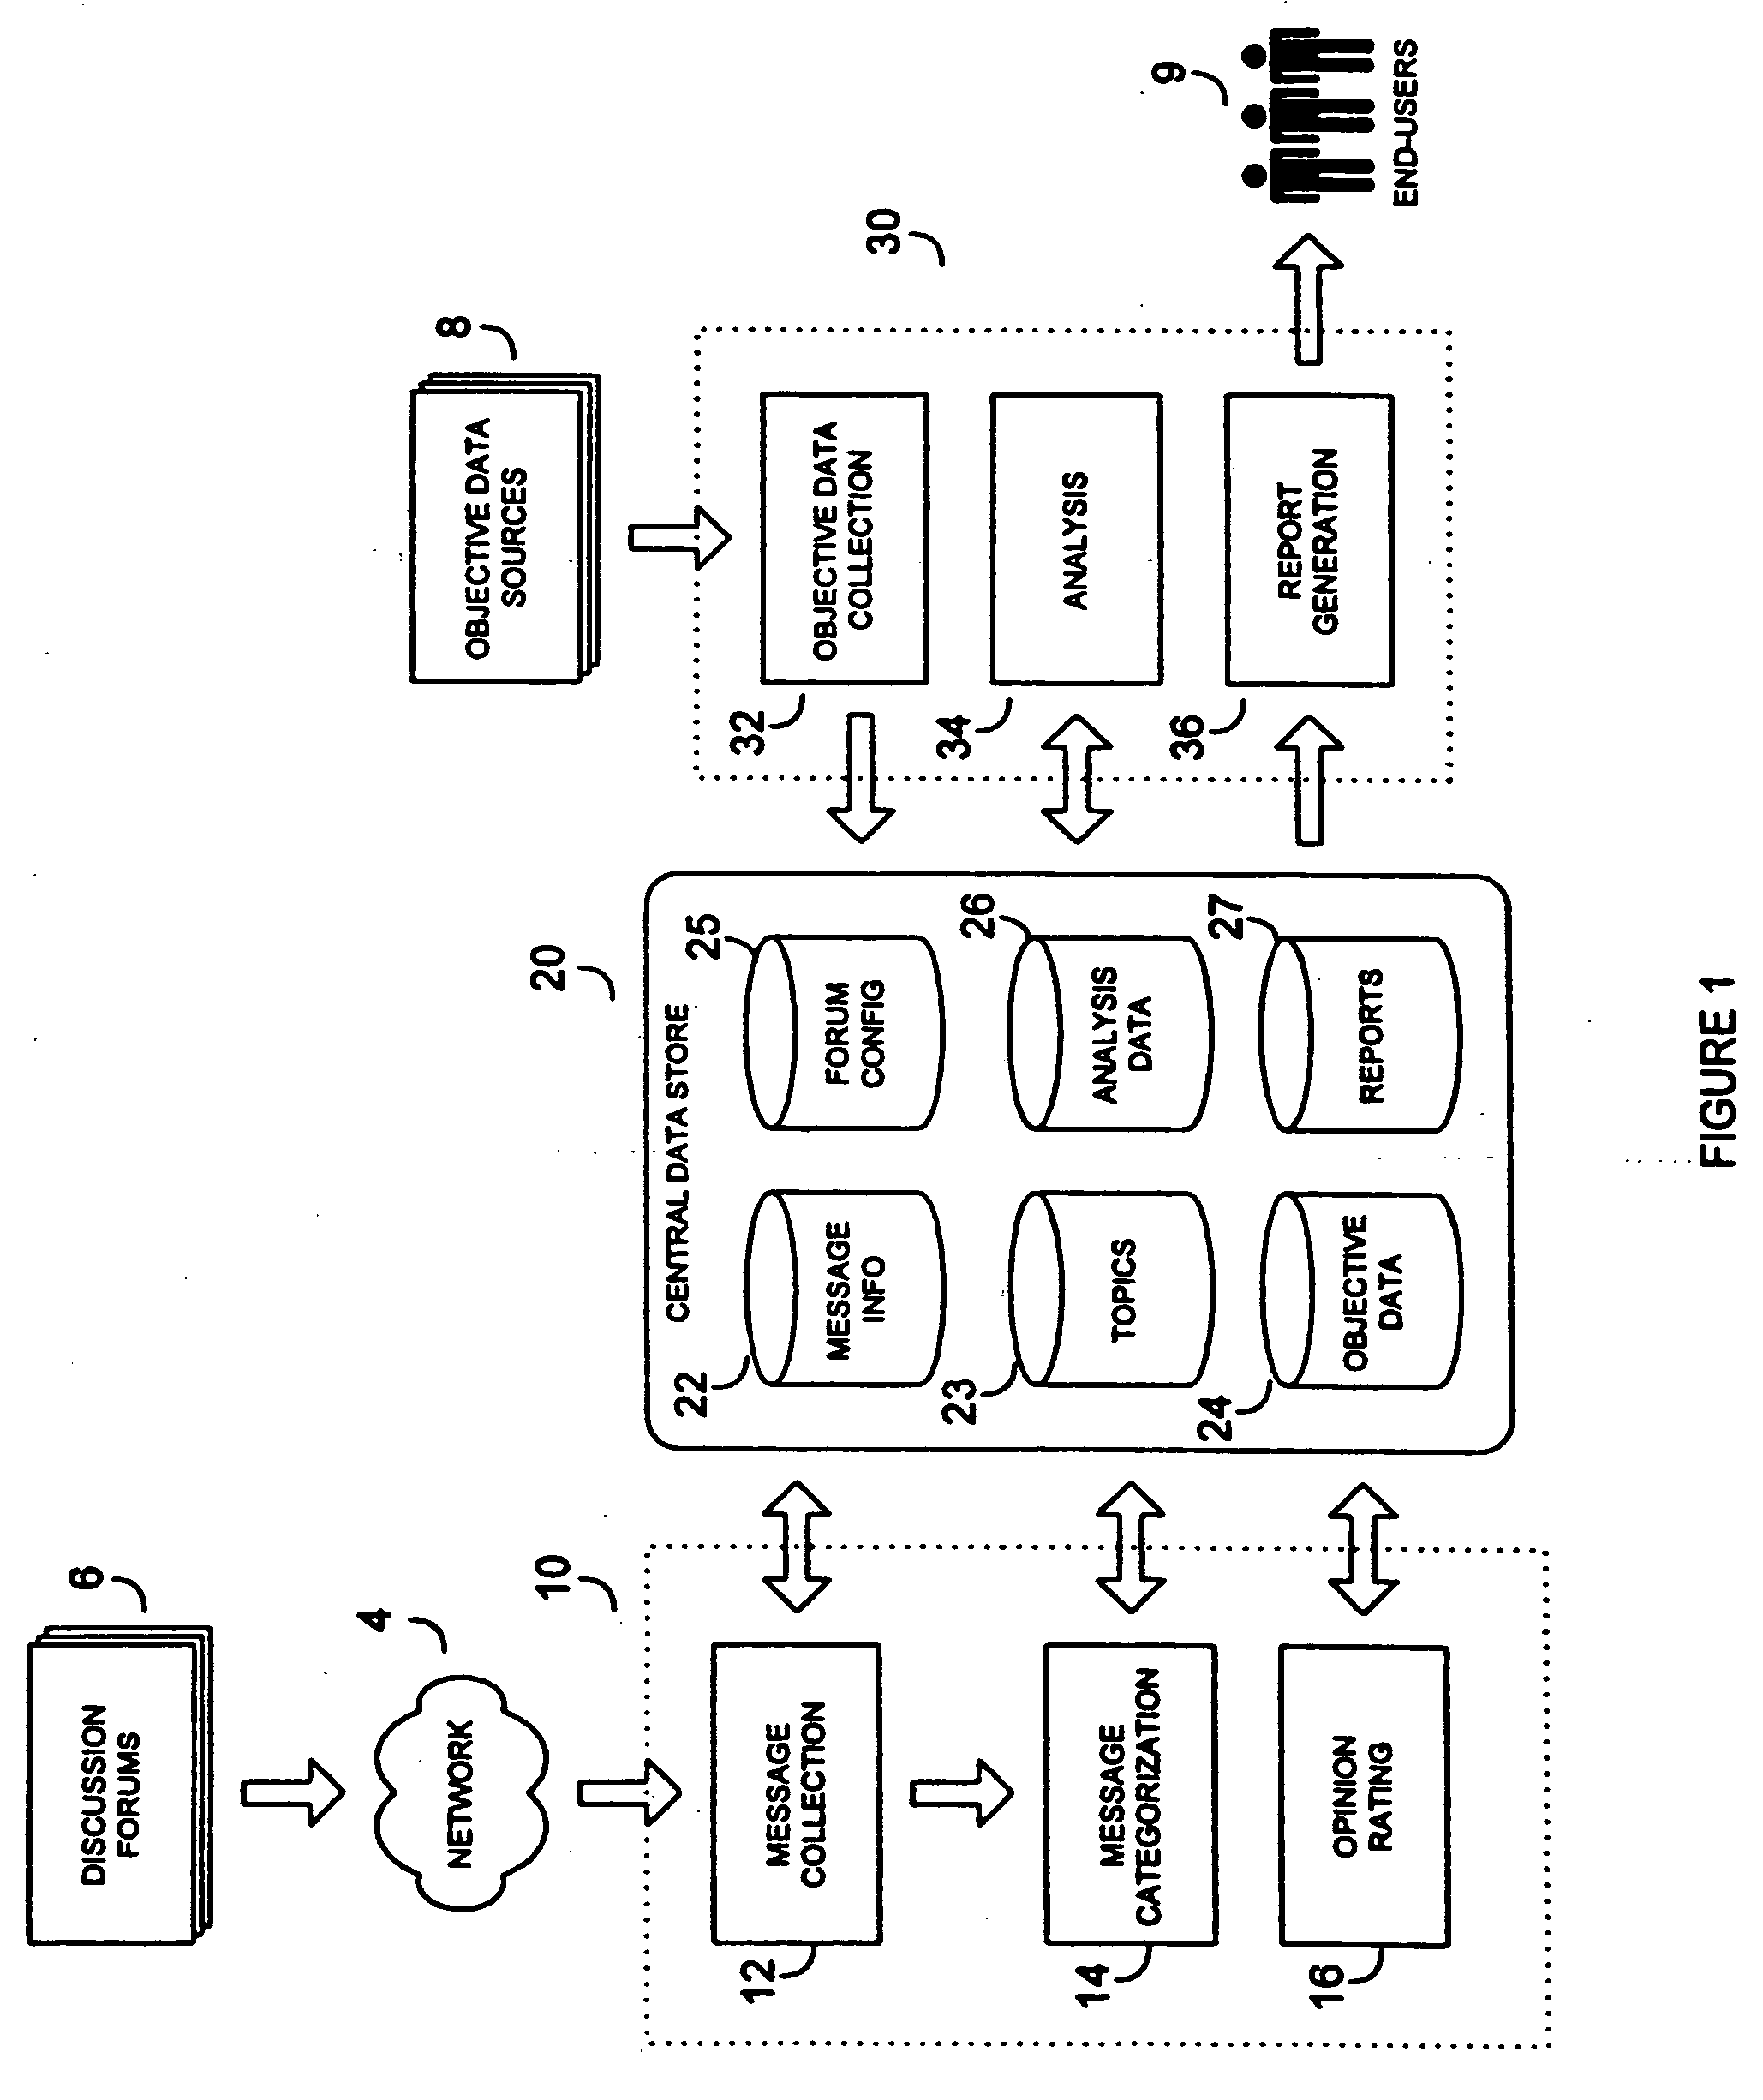 System and method for collection and analysis of electronic discussion messages